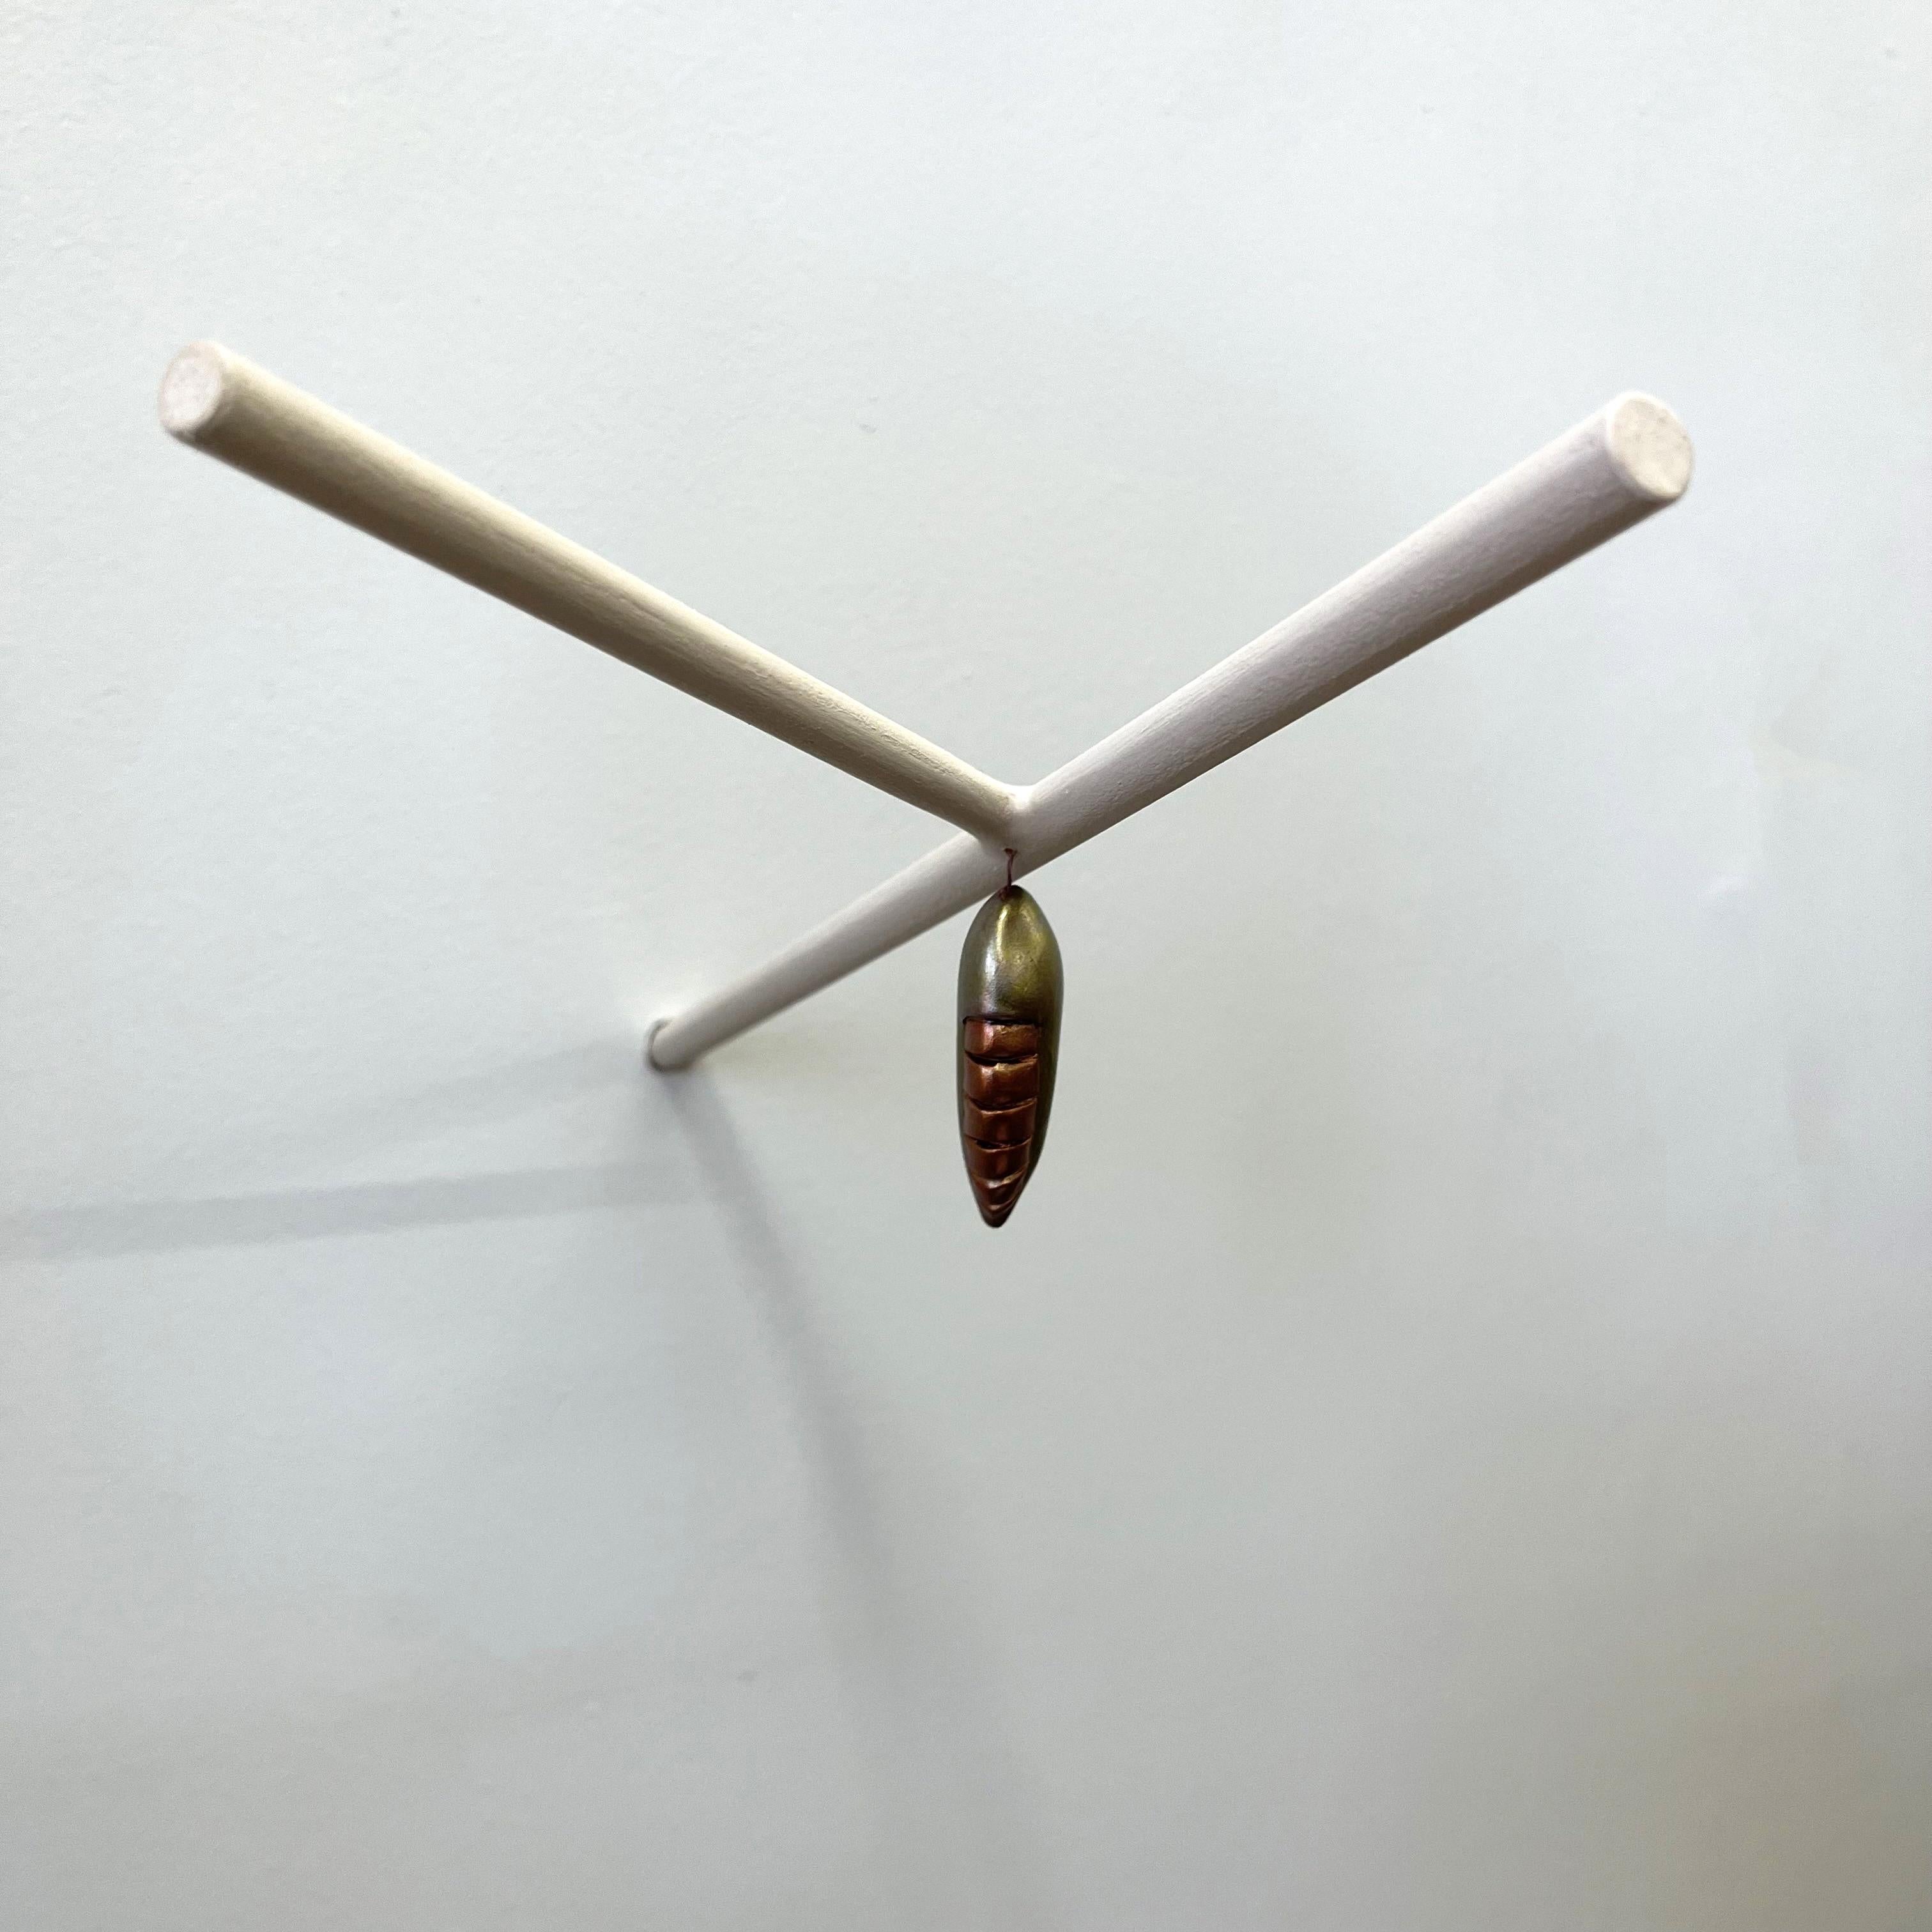 Chrysalis on a minimalist Branch (two) - Conceptual Sculpture by Bethany Krull